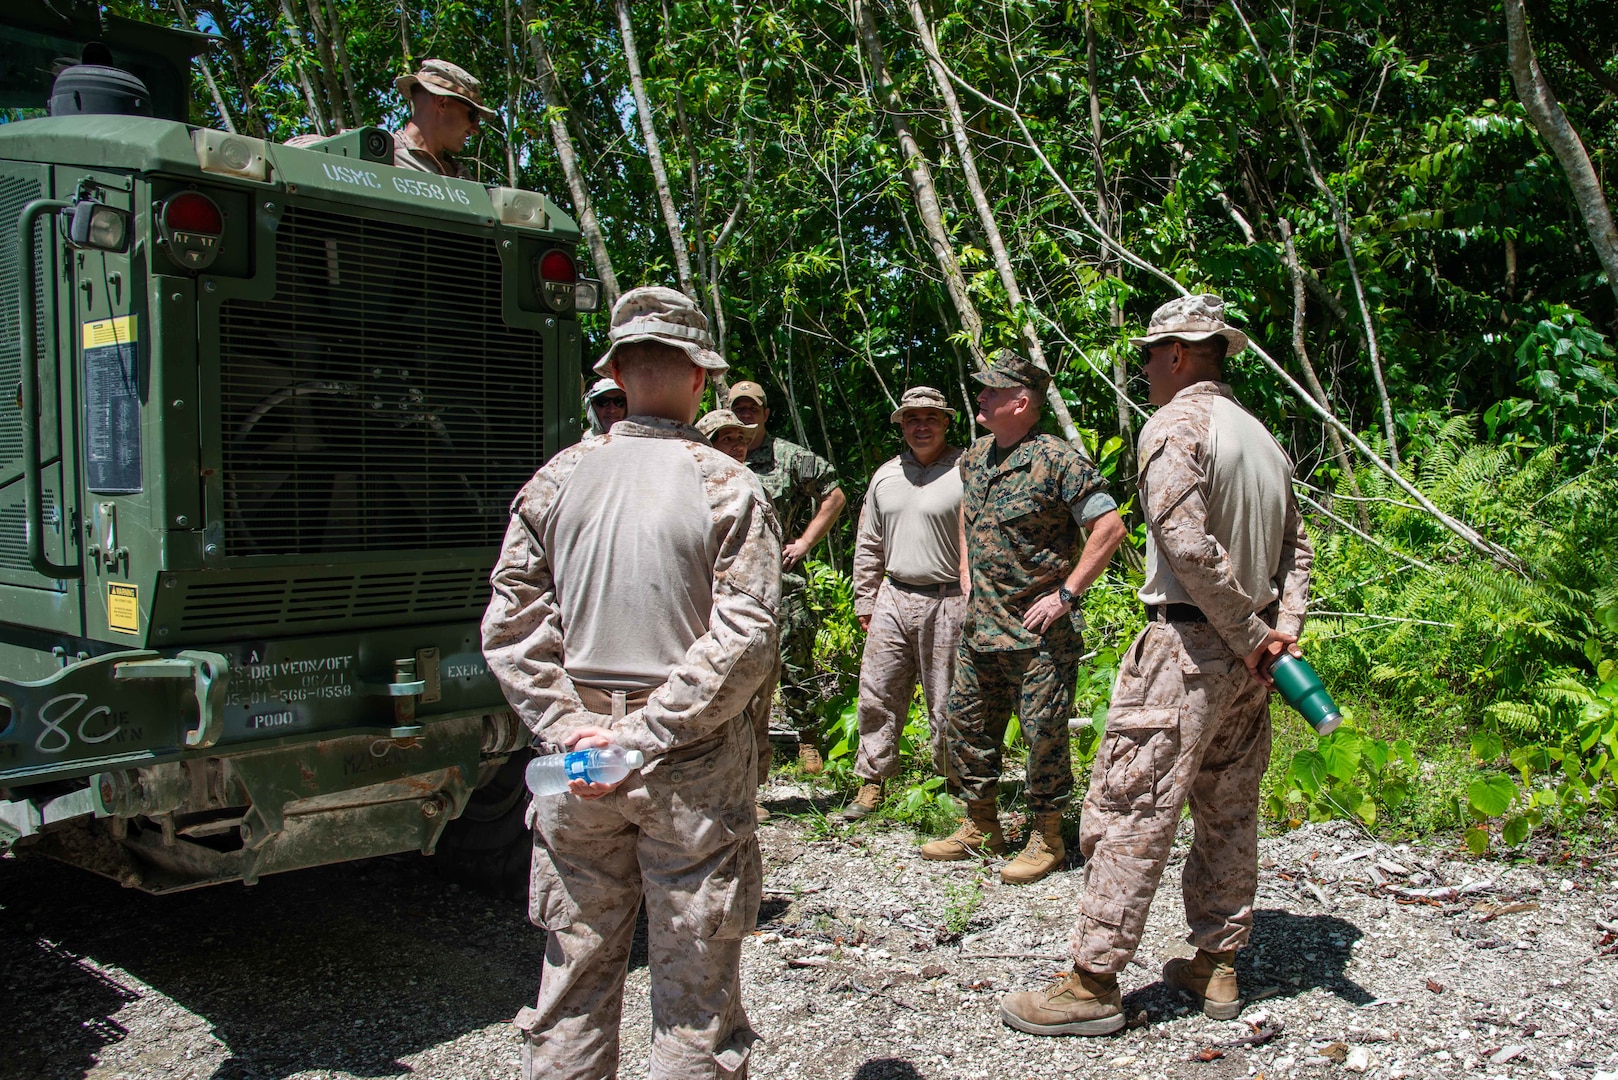 U.S. Marine Corps Lt. Gen. William M. Jurney, commander, U.S. Marine Corps Forces, Pacific, meets Marines with the Marine Corps Engineer Detachment-Palau 24.1 at the construction site for the Peleliu Airfield, Apr. 25. Jurney traveled to Palau to meet with local and military leaders to discuss regional defense partnerships and opportunities. Palau is one of the Compact of Free Association states aligned with the United States, which provides defense, funding, and access to social services. (U.S. Navy photo by Mass Communication Specialist 1st Class Samantha Jetzer)